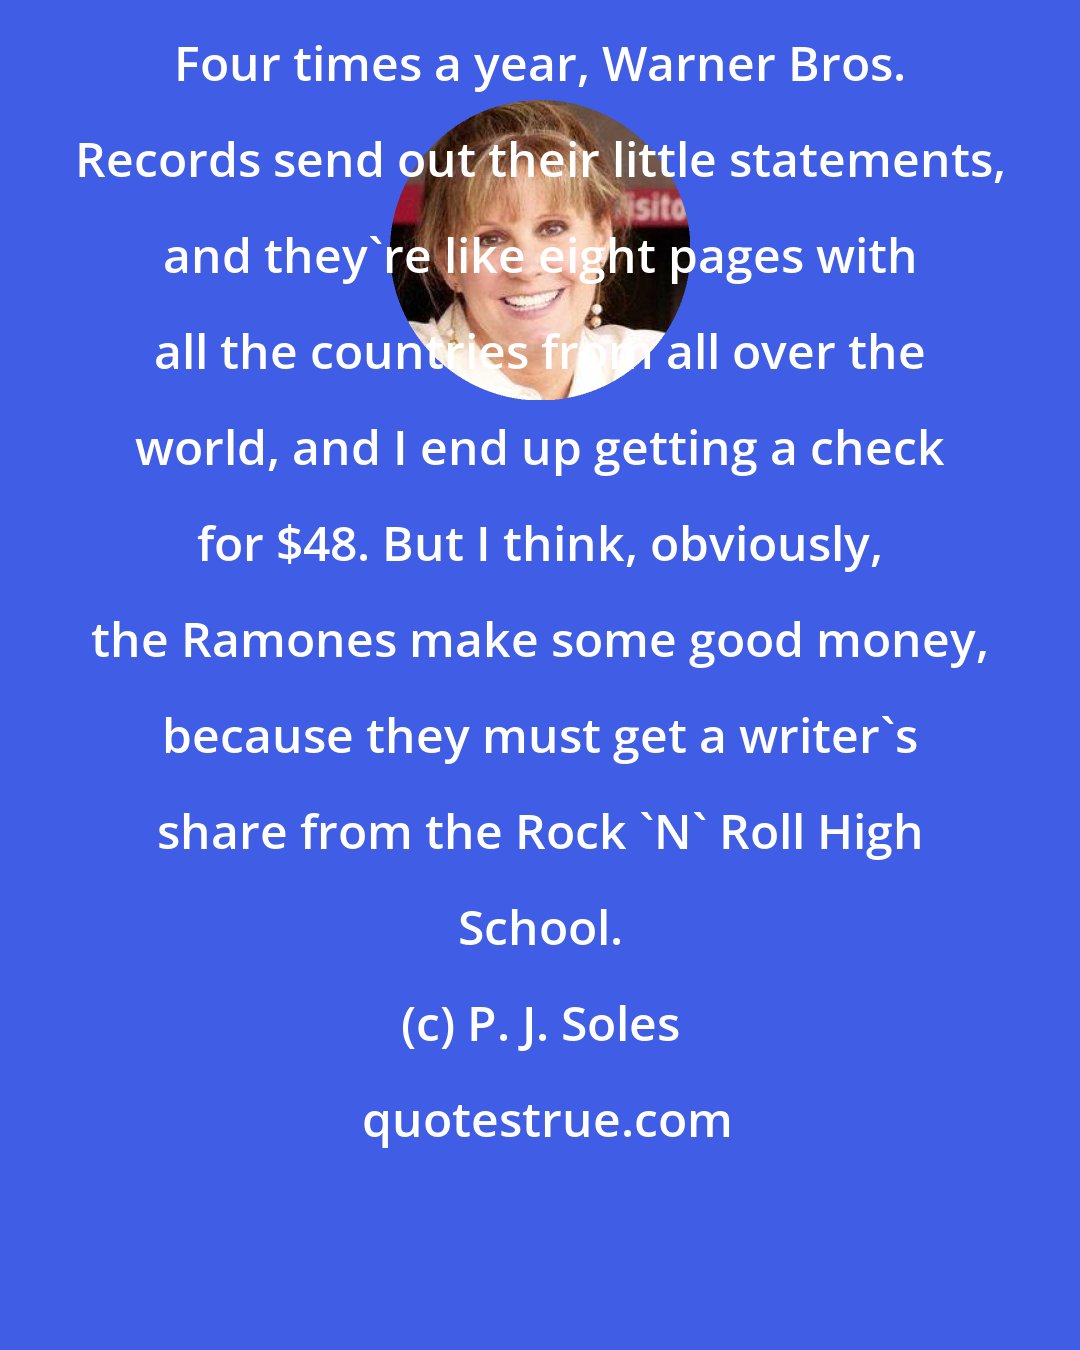 P. J. Soles: Four times a year, Warner Bros. Records send out their little statements, and they're like eight pages with all the countries from all over the world, and I end up getting a check for $48. But I think, obviously, the Ramones make some good money, because they must get a writer's share from the Rock 'N' Roll High School.